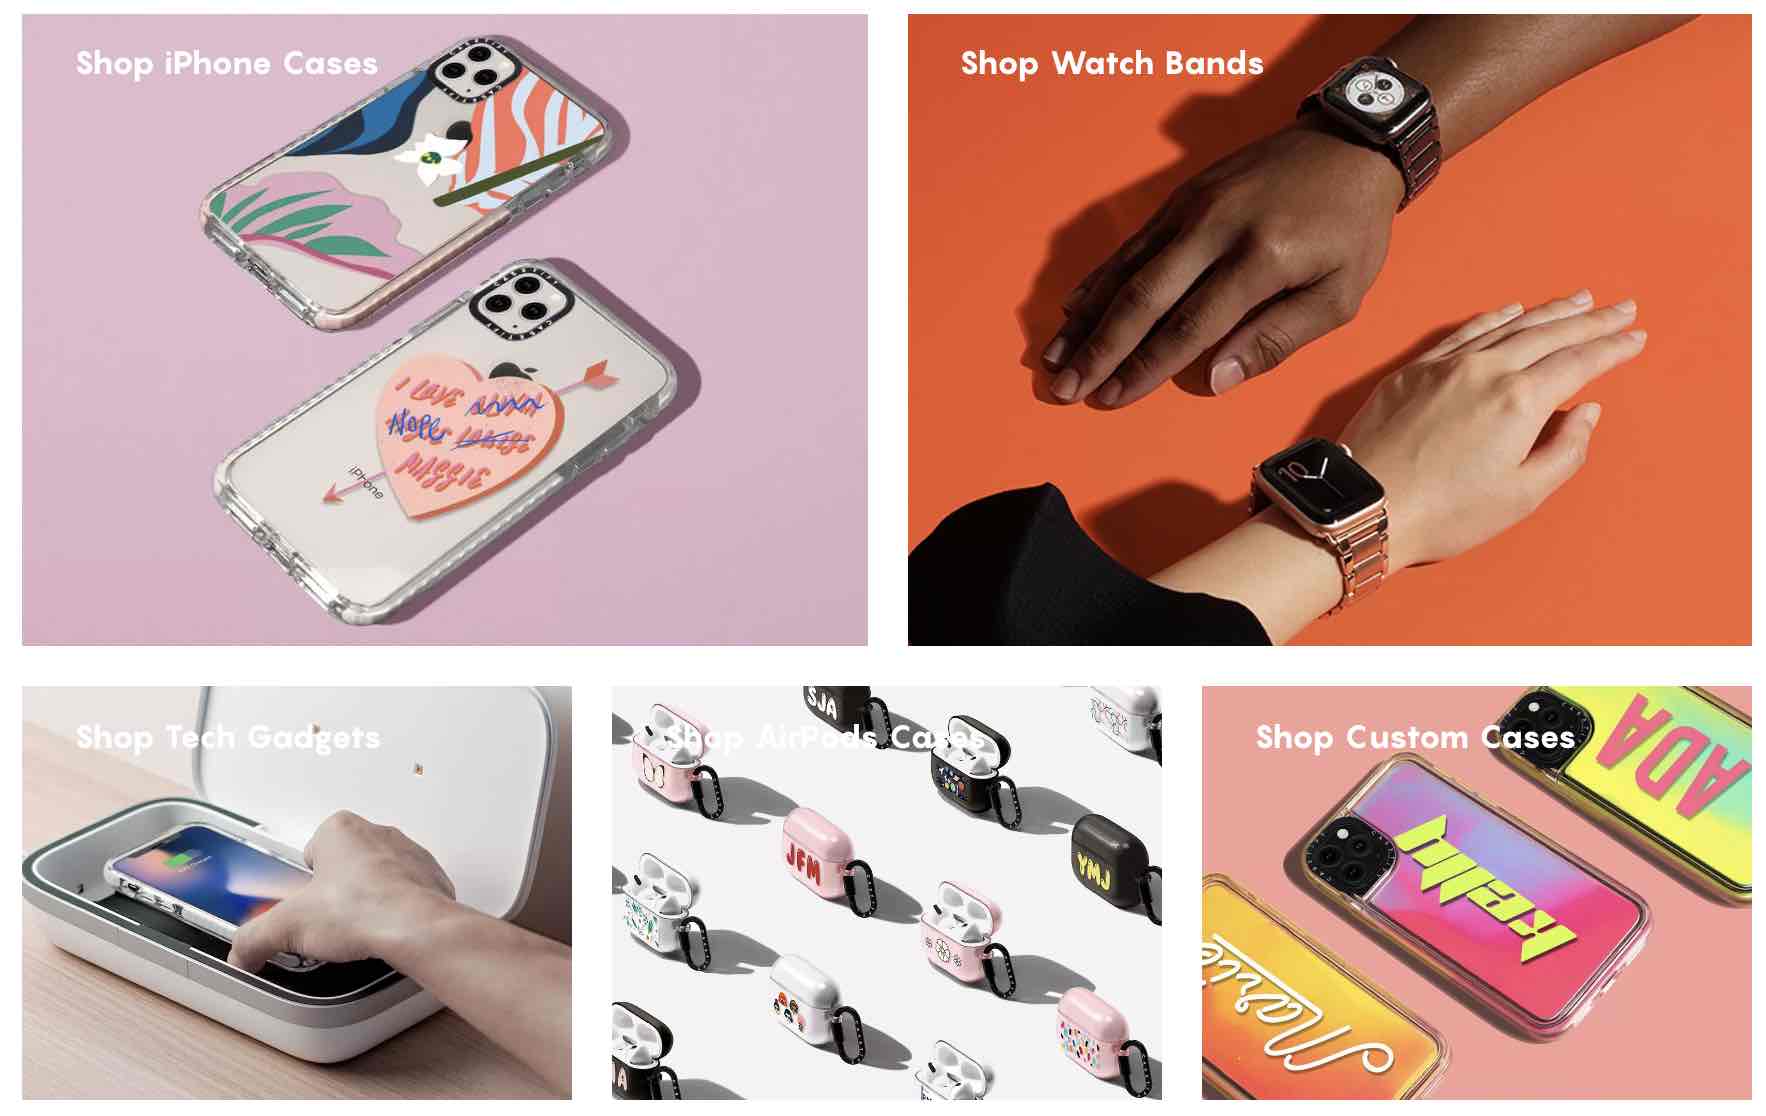 Casetify - Show off your tech in style! 📱Introducing the